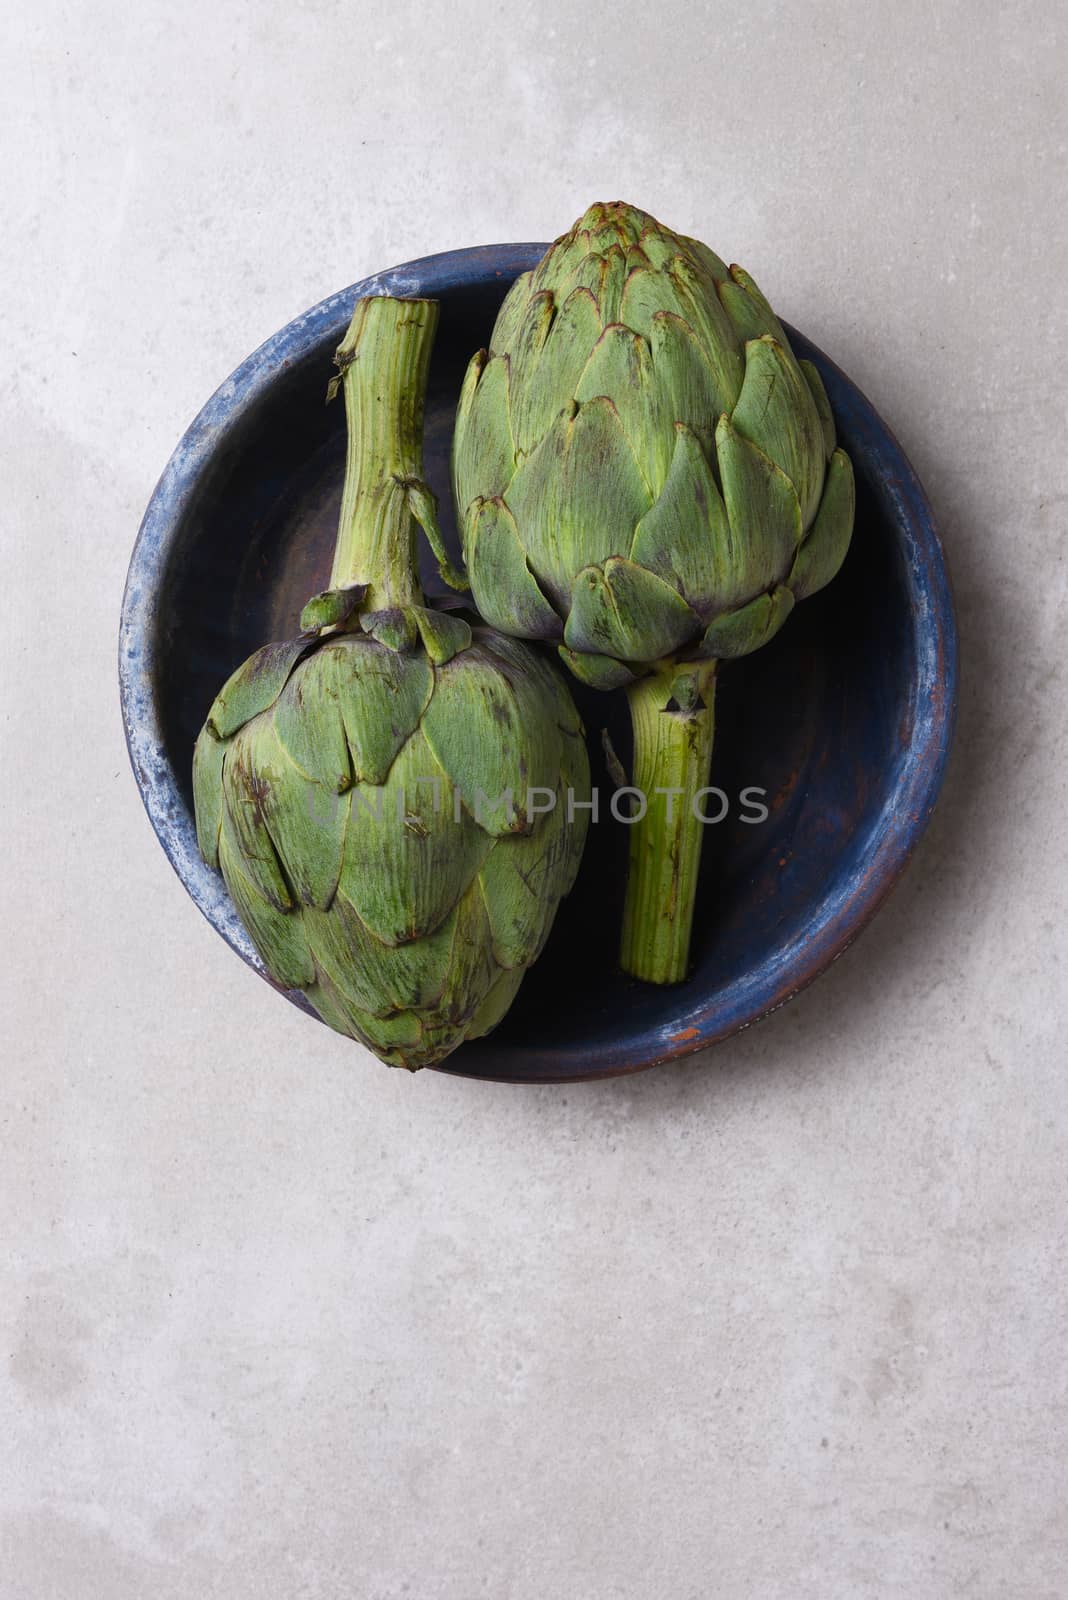 Two artichokes in a blue bowl on a mottled gray background with copy space.